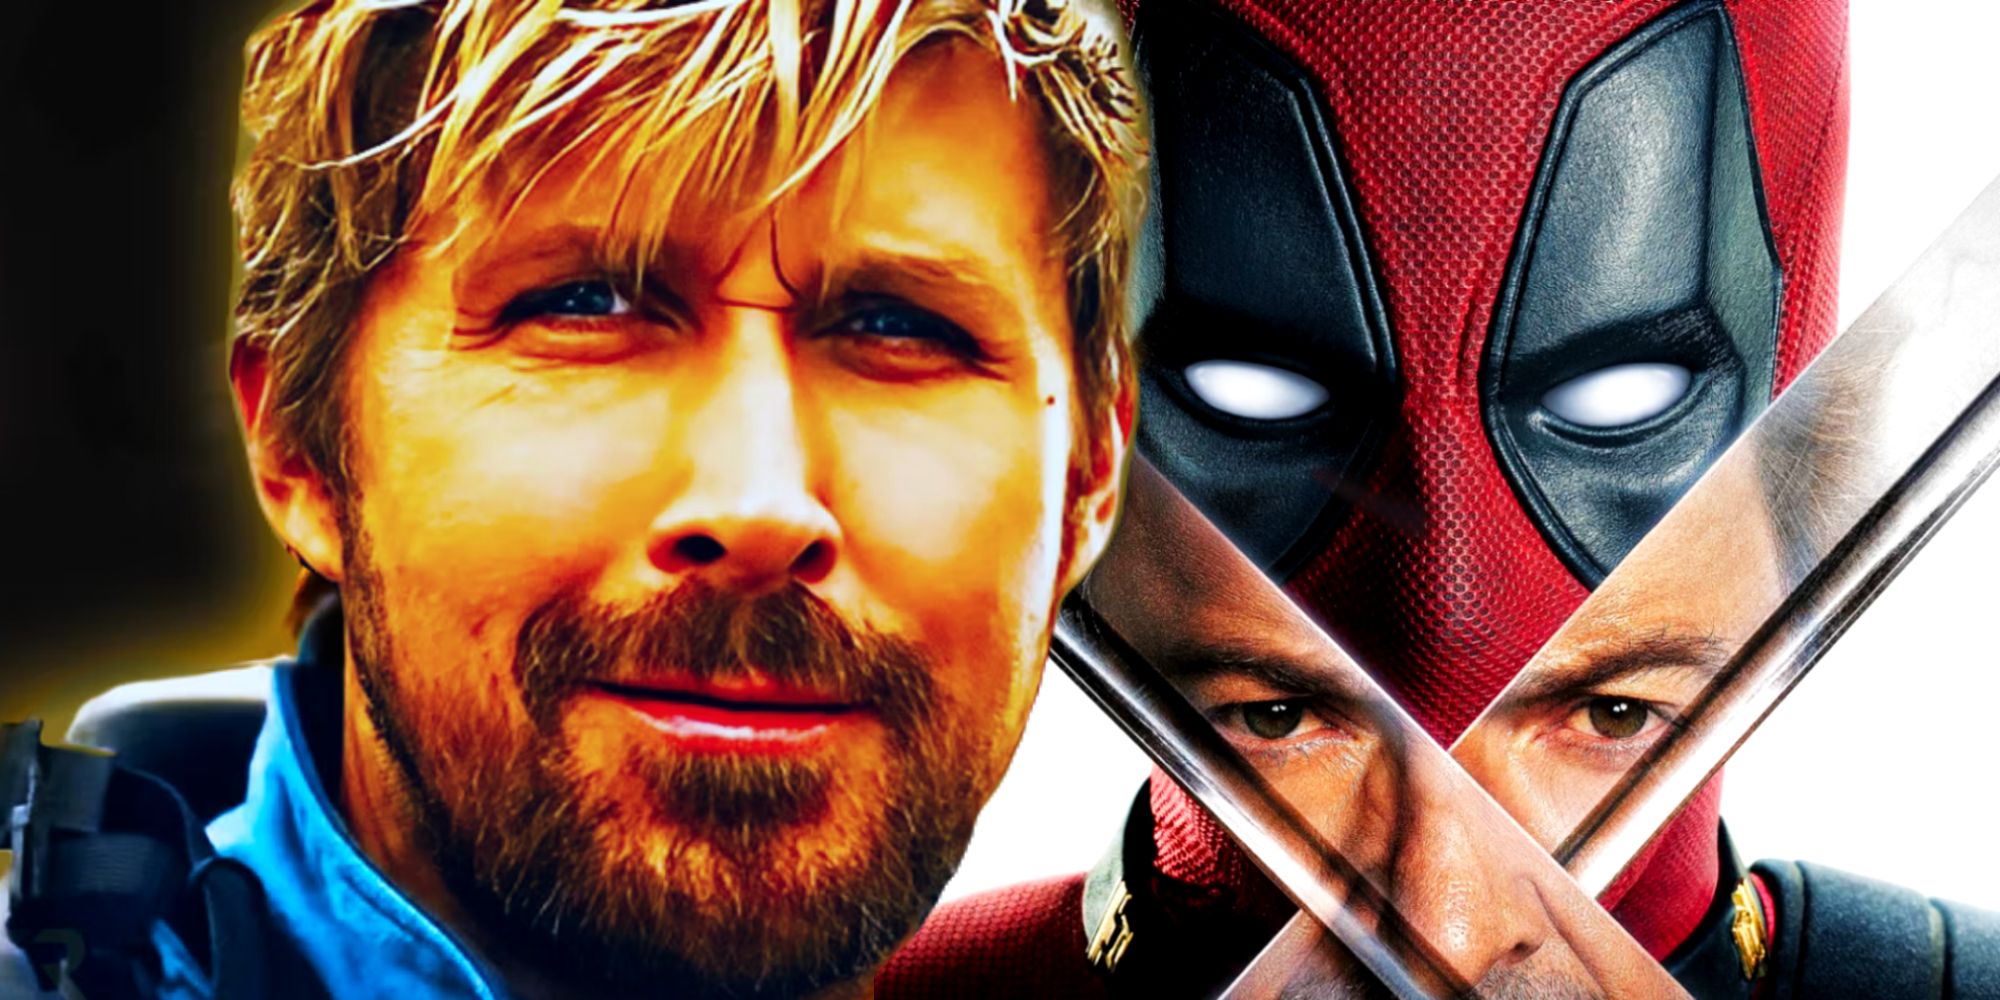 Ryan Gosling Smirks in The Fall Guy and Wade Wilson Faces Wolverine in Deadpool & Wolverine Poster